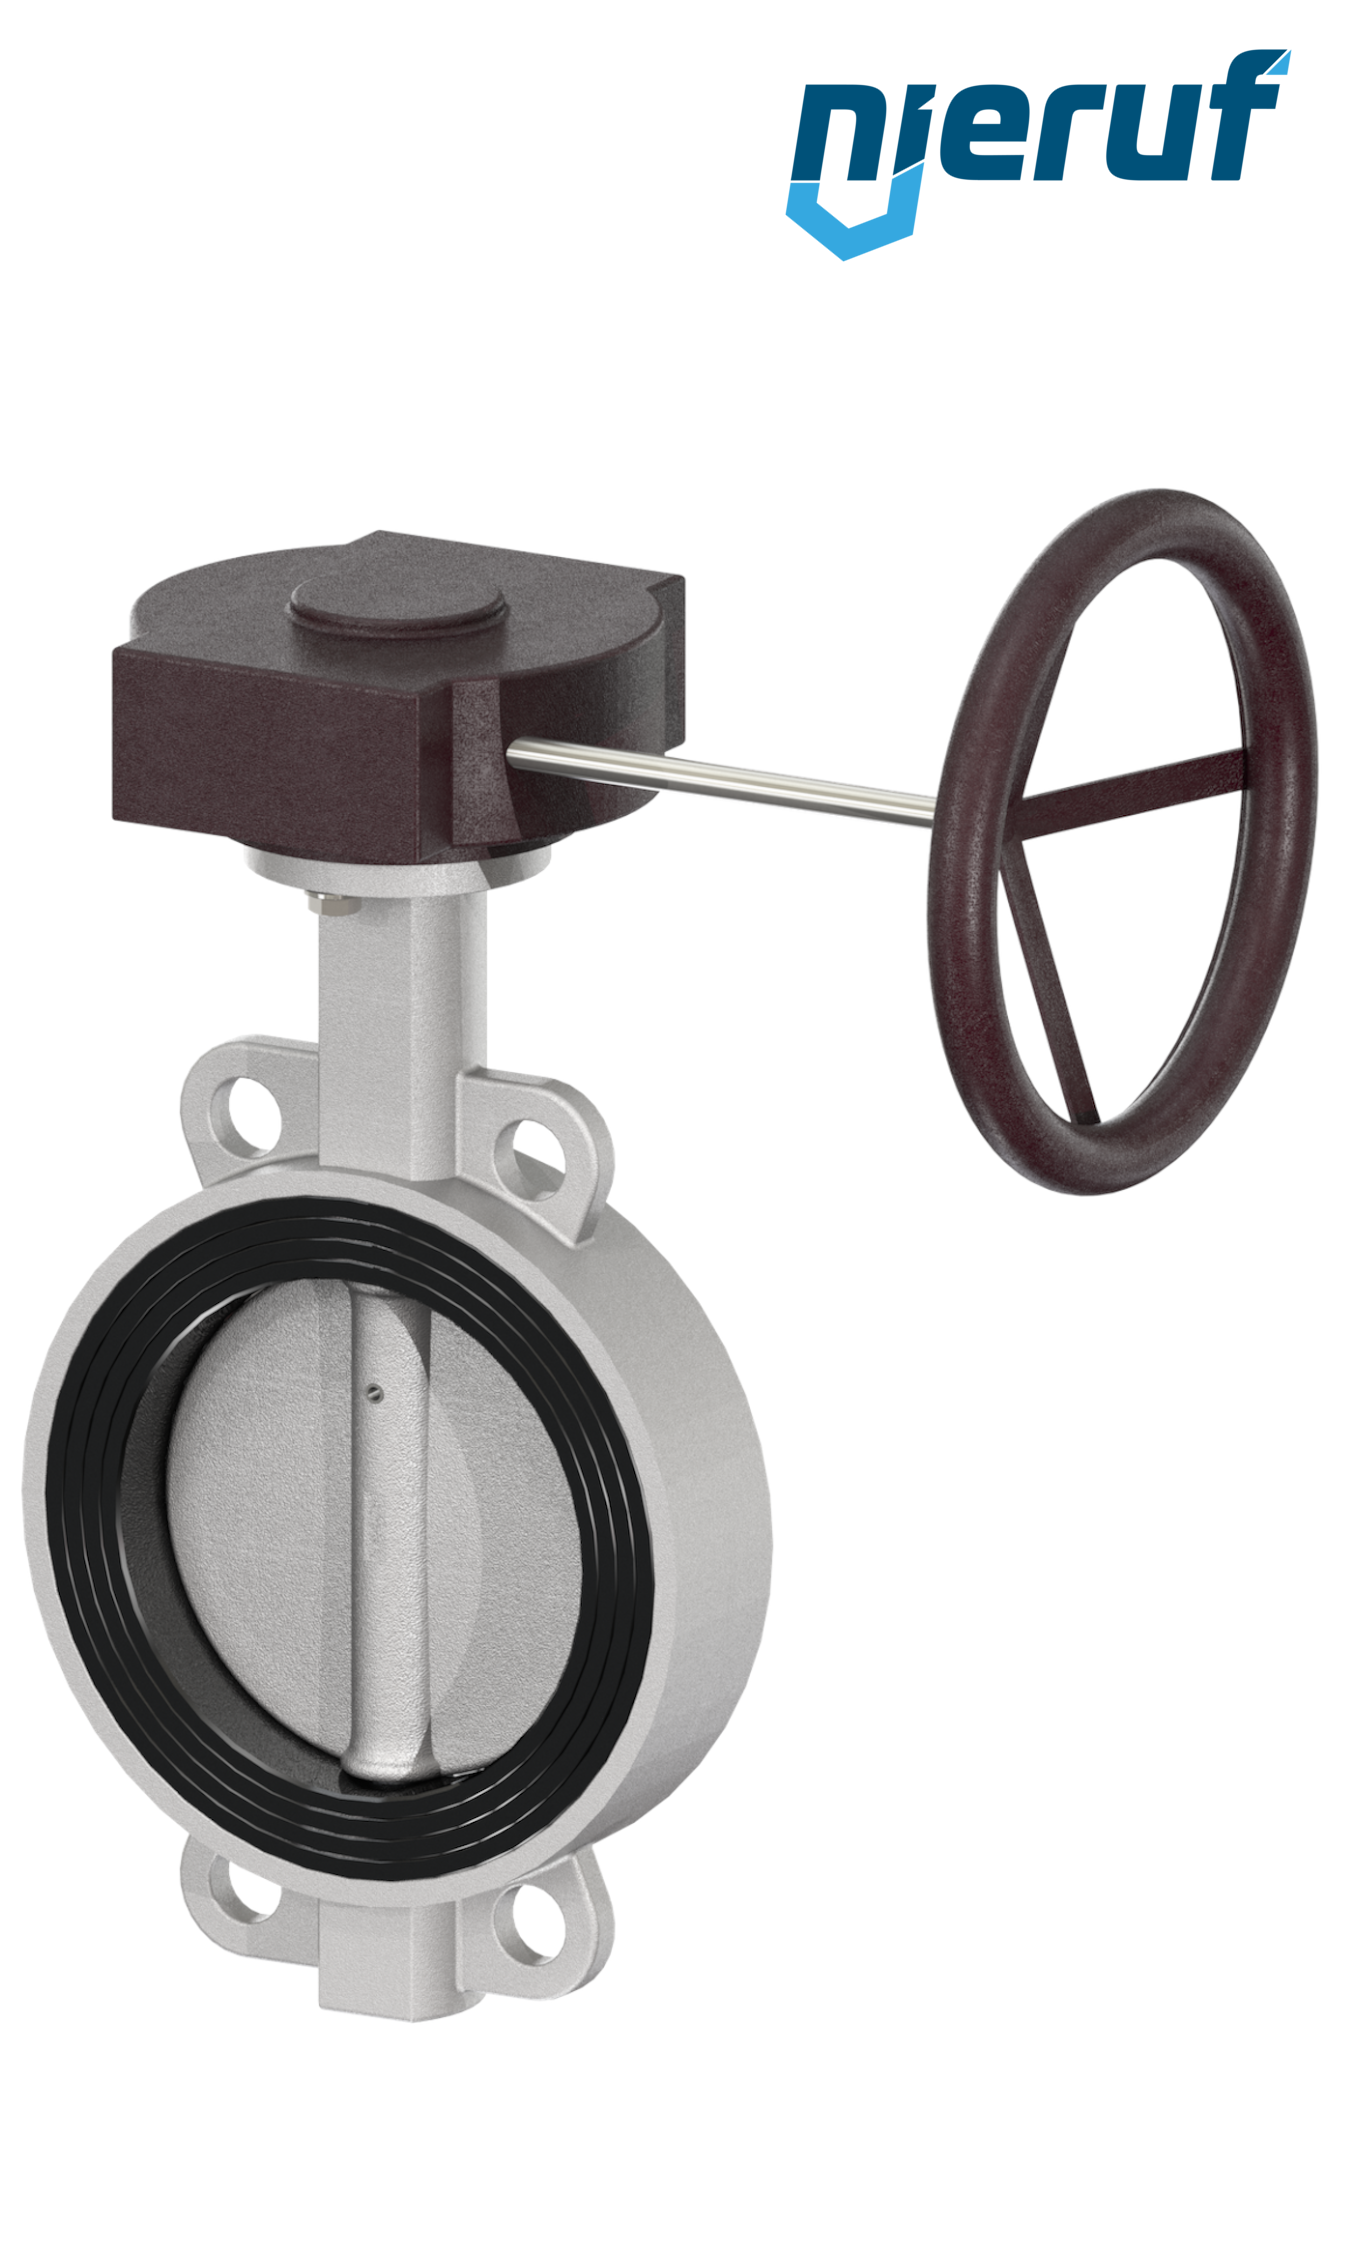 Butterfly-valve-stainless-steel DN 150 PN16 AK08 EPDM gearbox